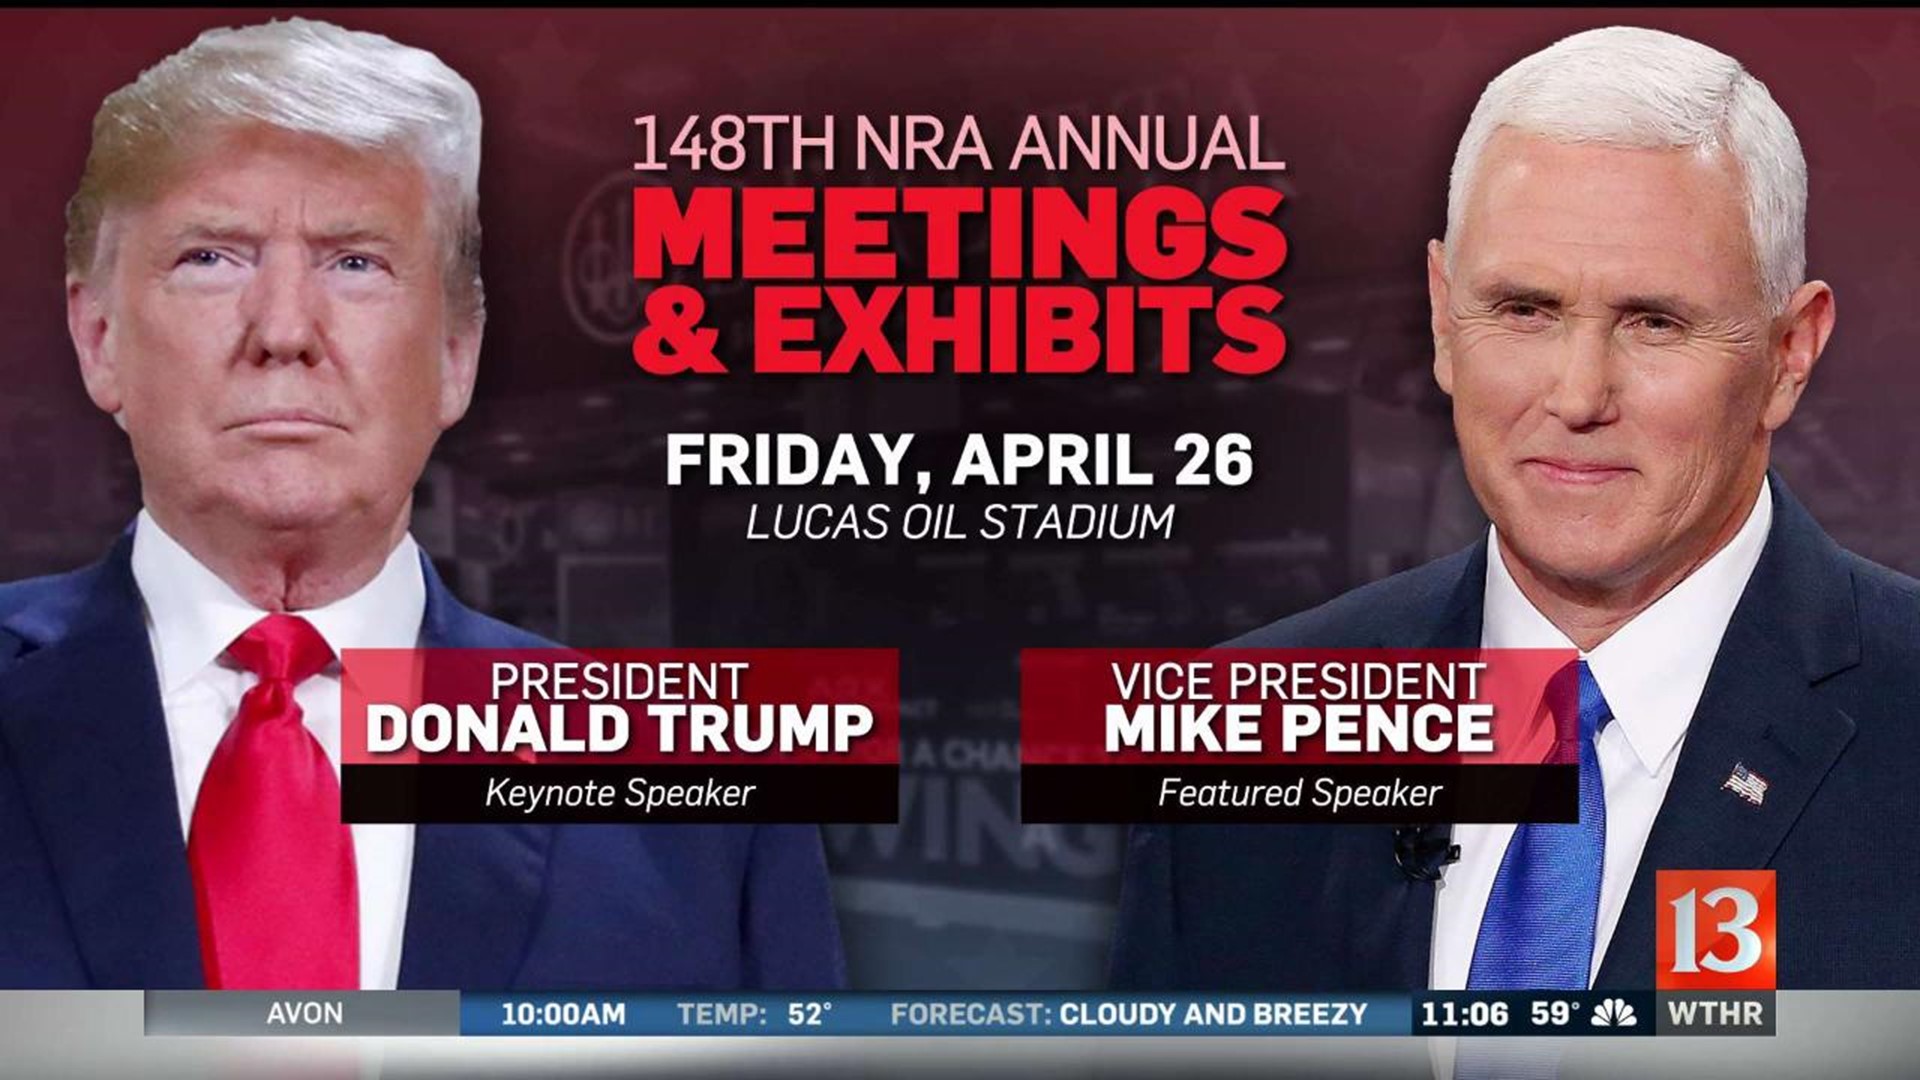 NRA Convention Starts Friday